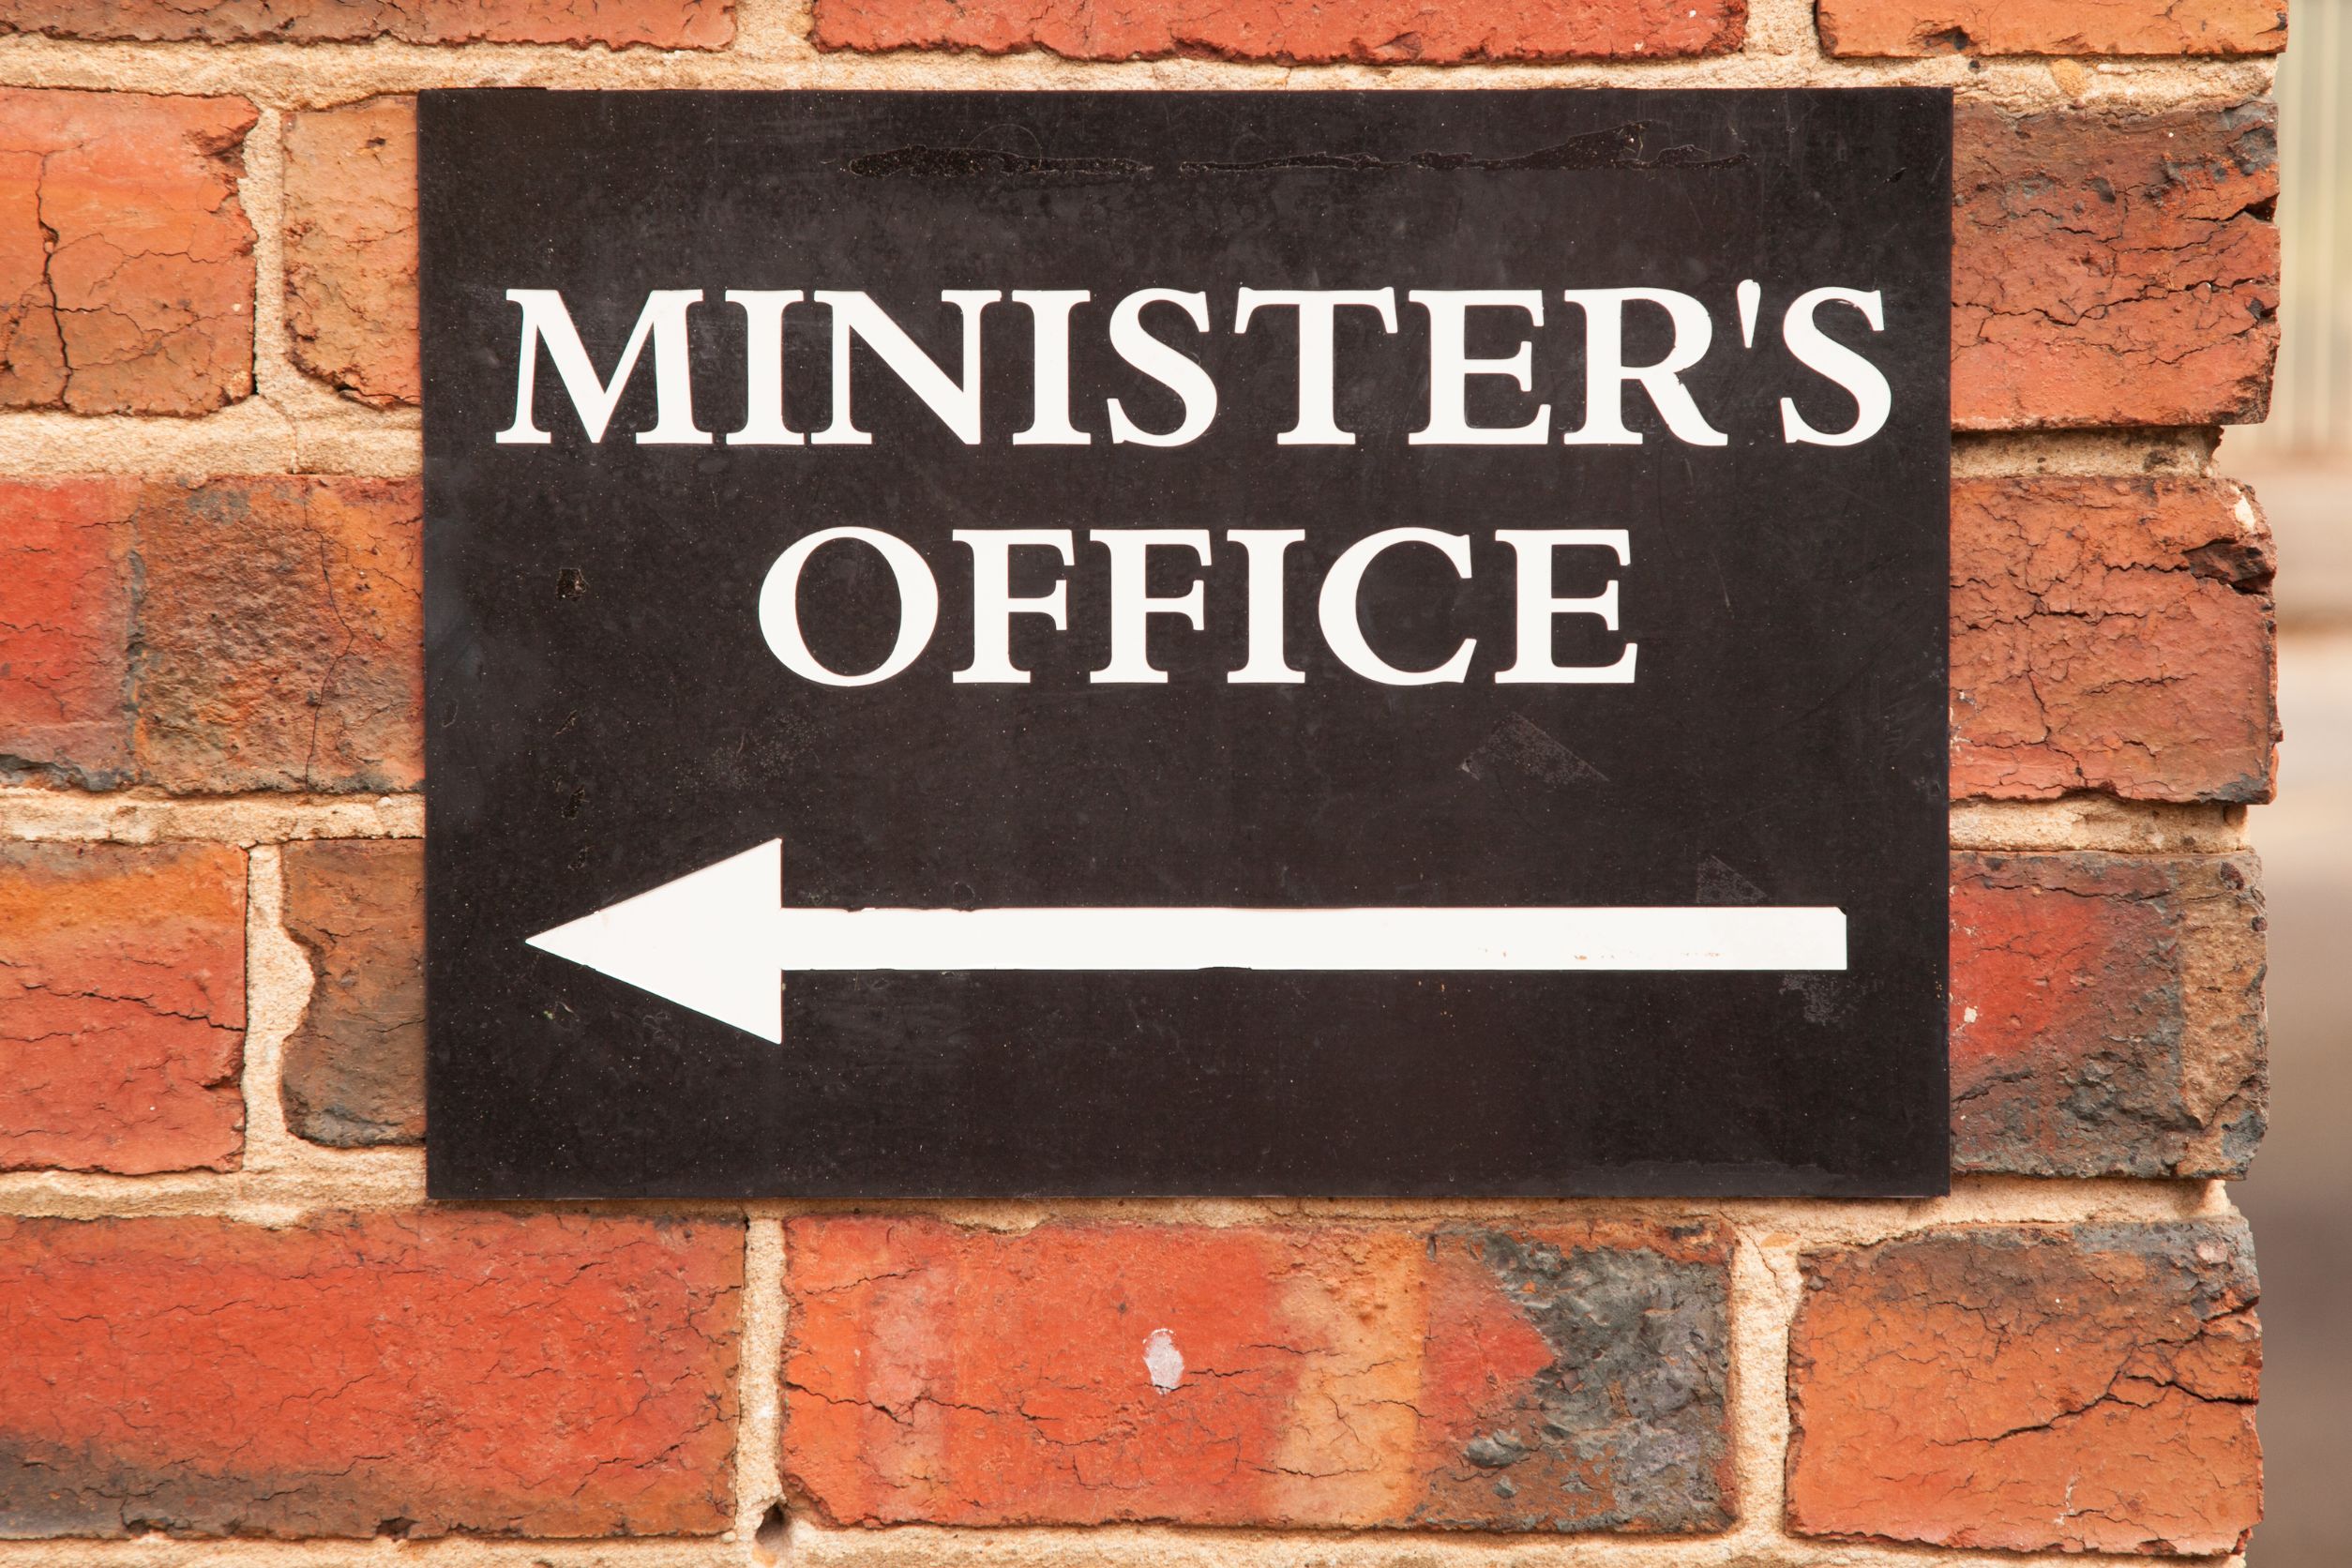 Is being a minister actually a job